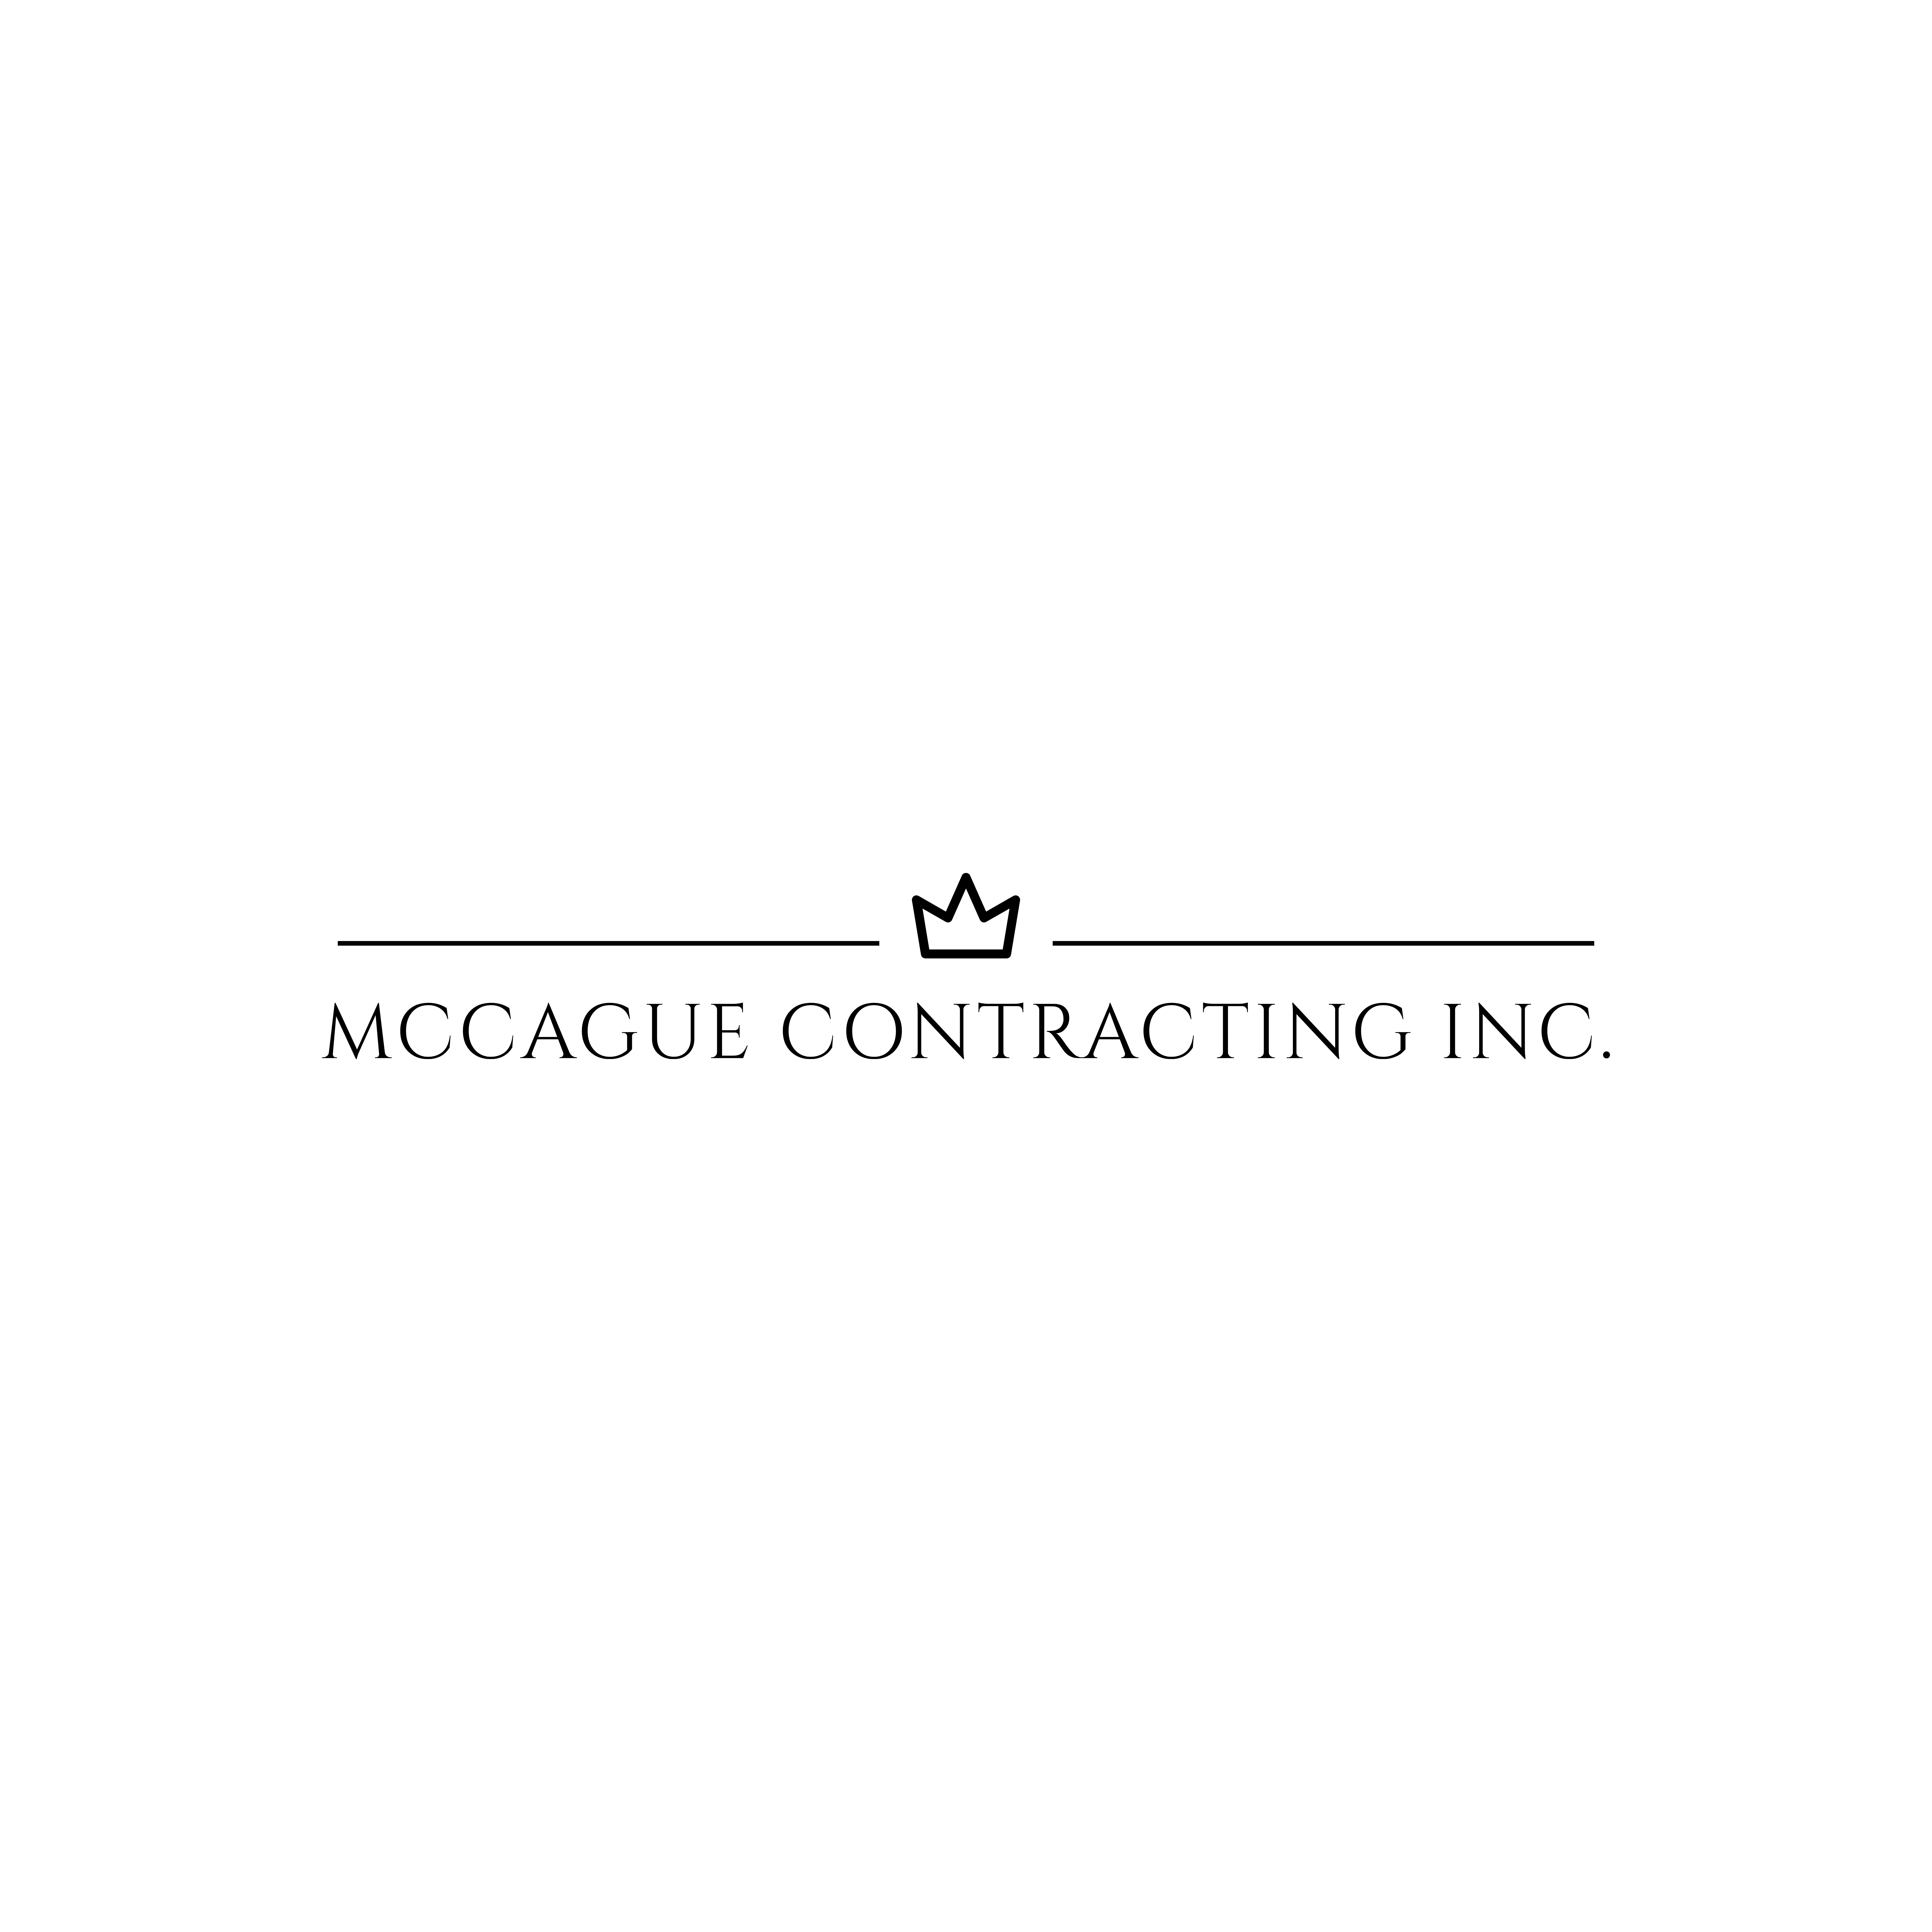 MCCAGUE CONTRACTING